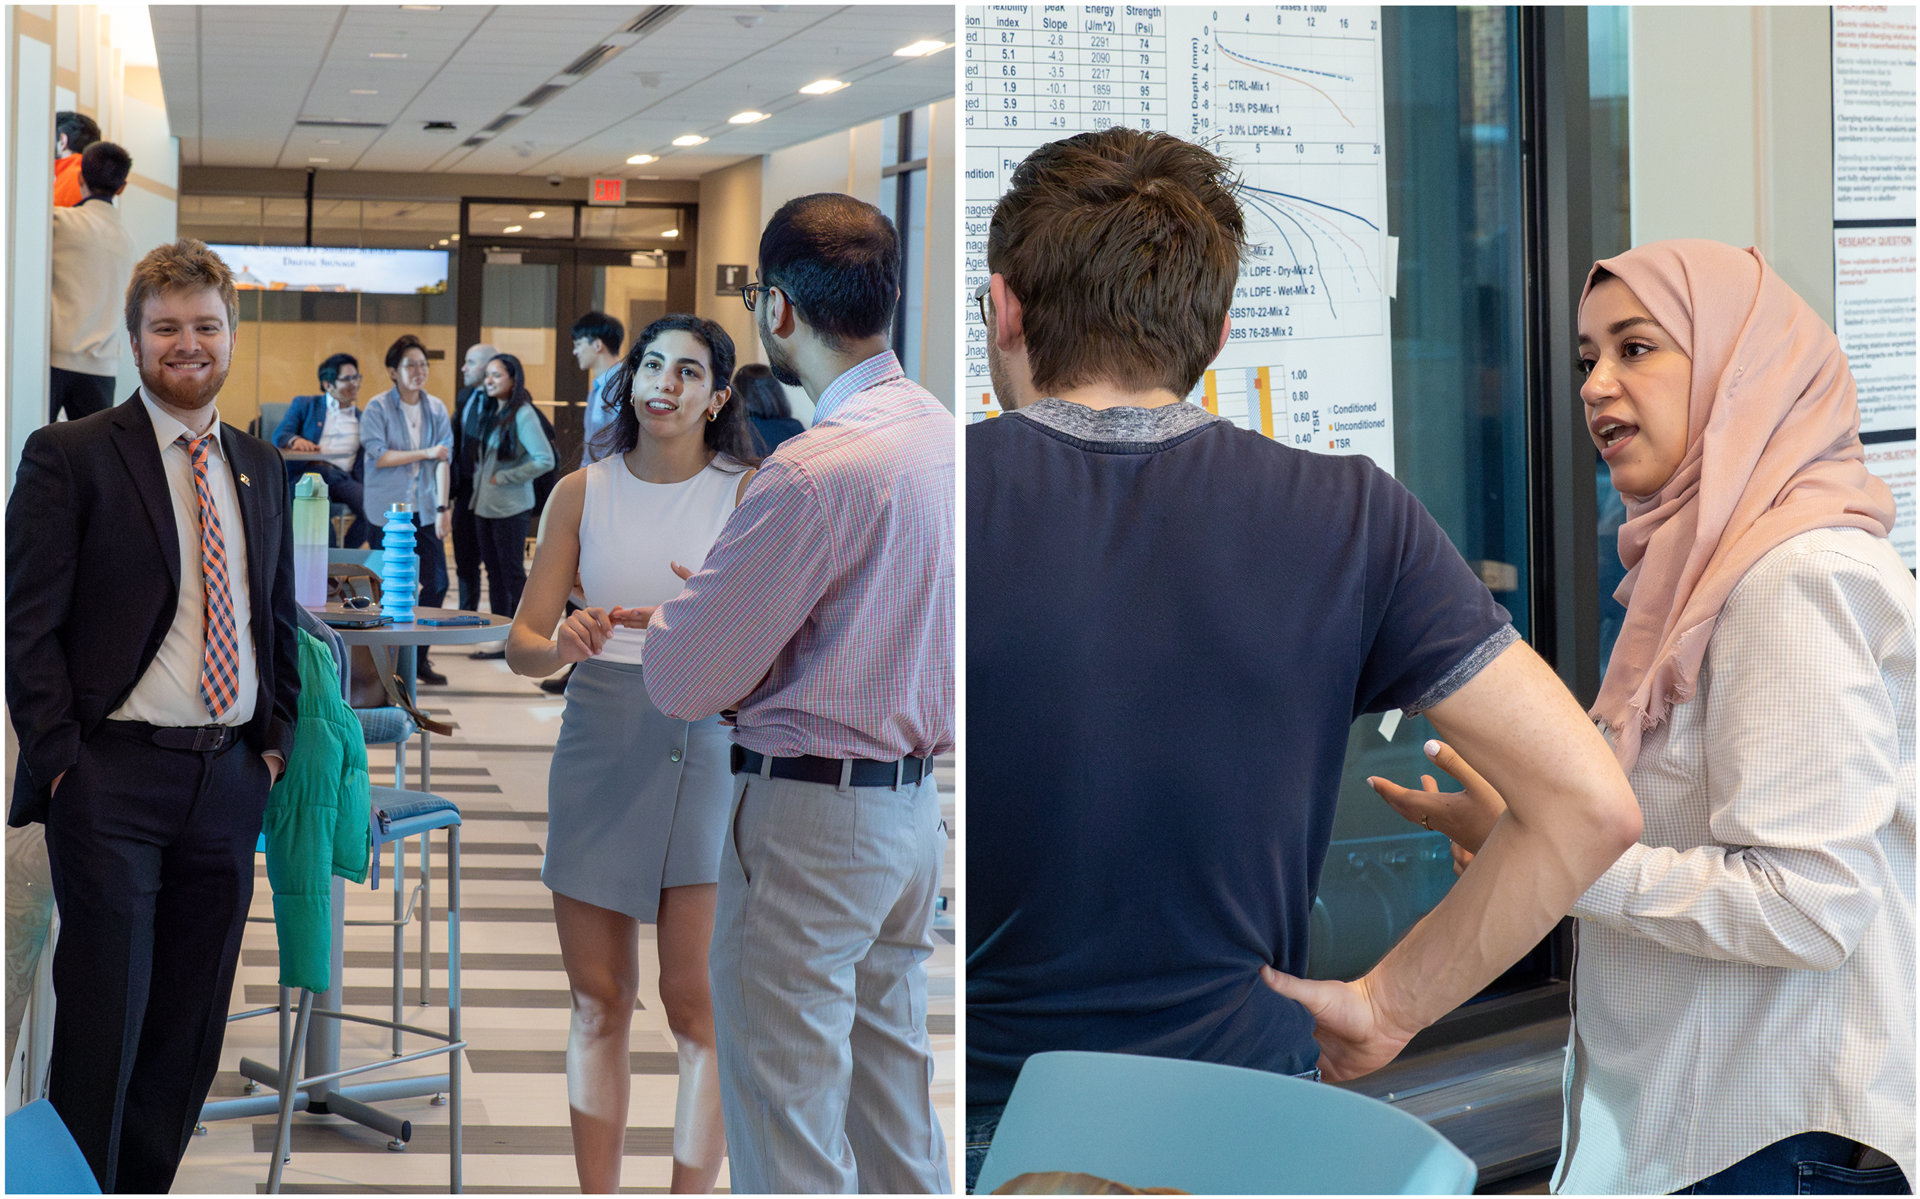 Left: Robert Wiggins, CEE doctoral student, and Lama Abufares, ICT doctoral student, engage in discussions at the poster session. Right: Yusra Alhadidi, ICT doctoral student, presents her research findings. Photos by Jordan Ouellet.